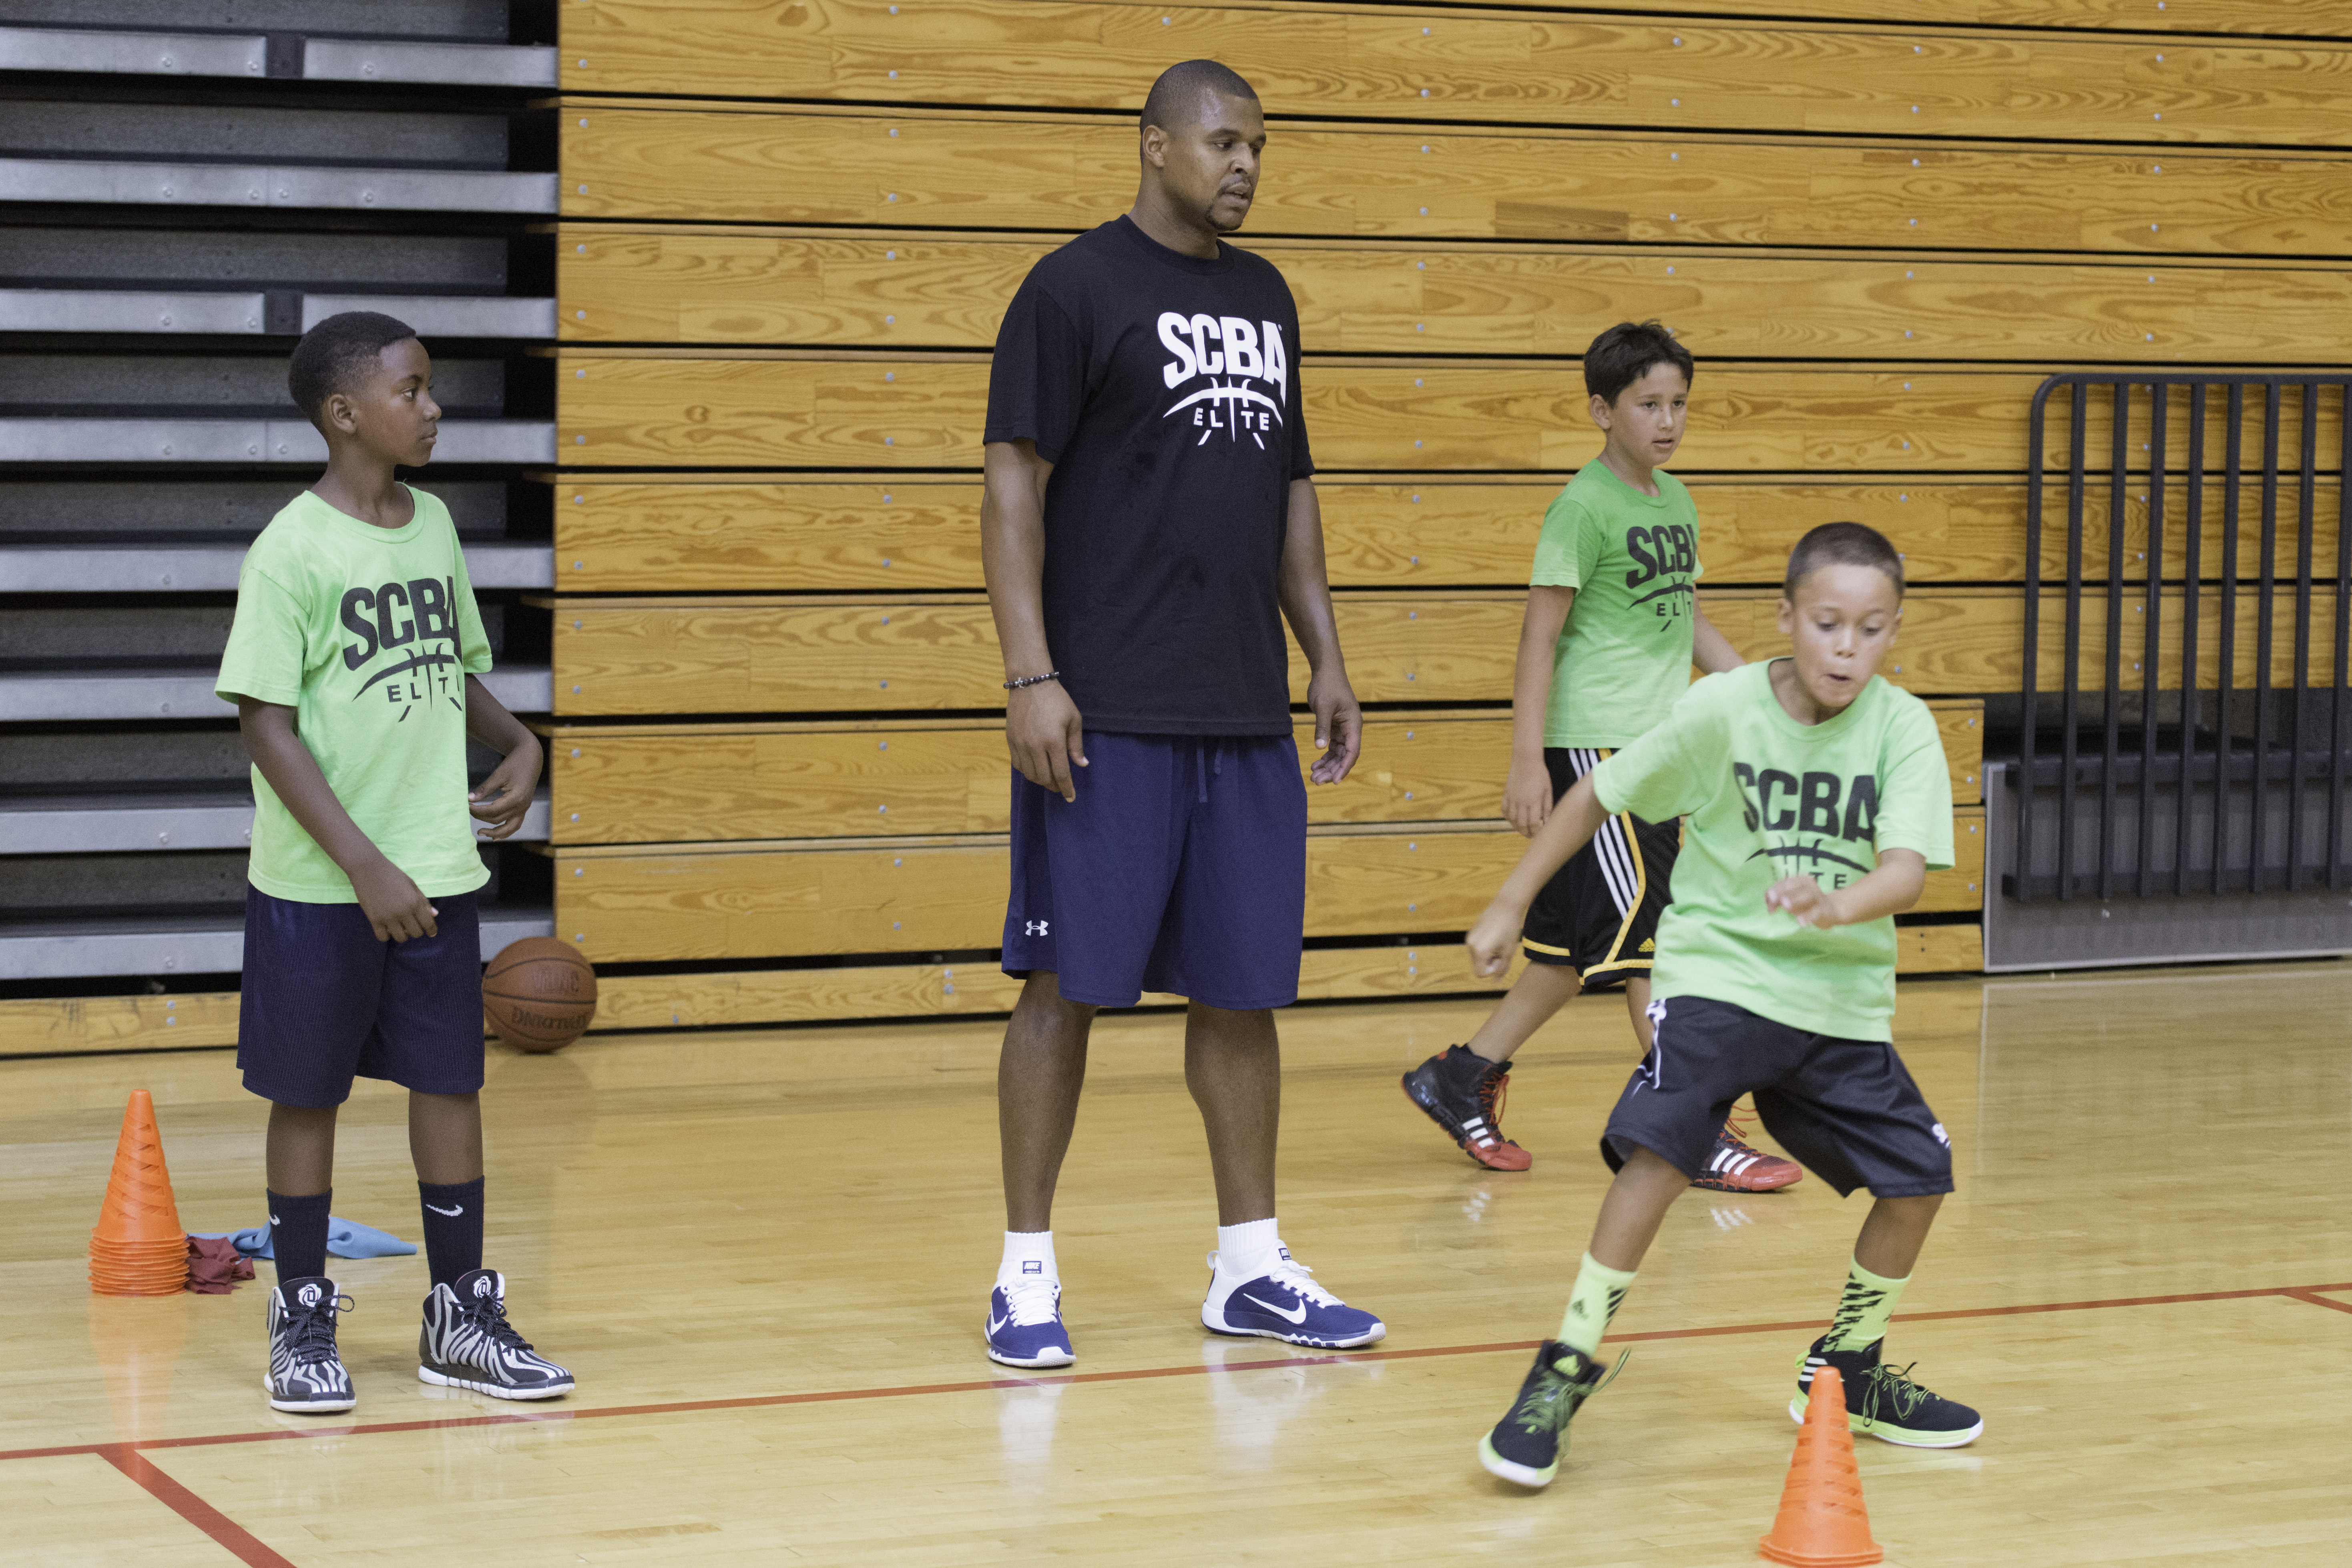 Schea Cotton works with young basketball players and has a vision for a program to help them develop (Photo: Kelvin Kuo, USA TODAY Sports)